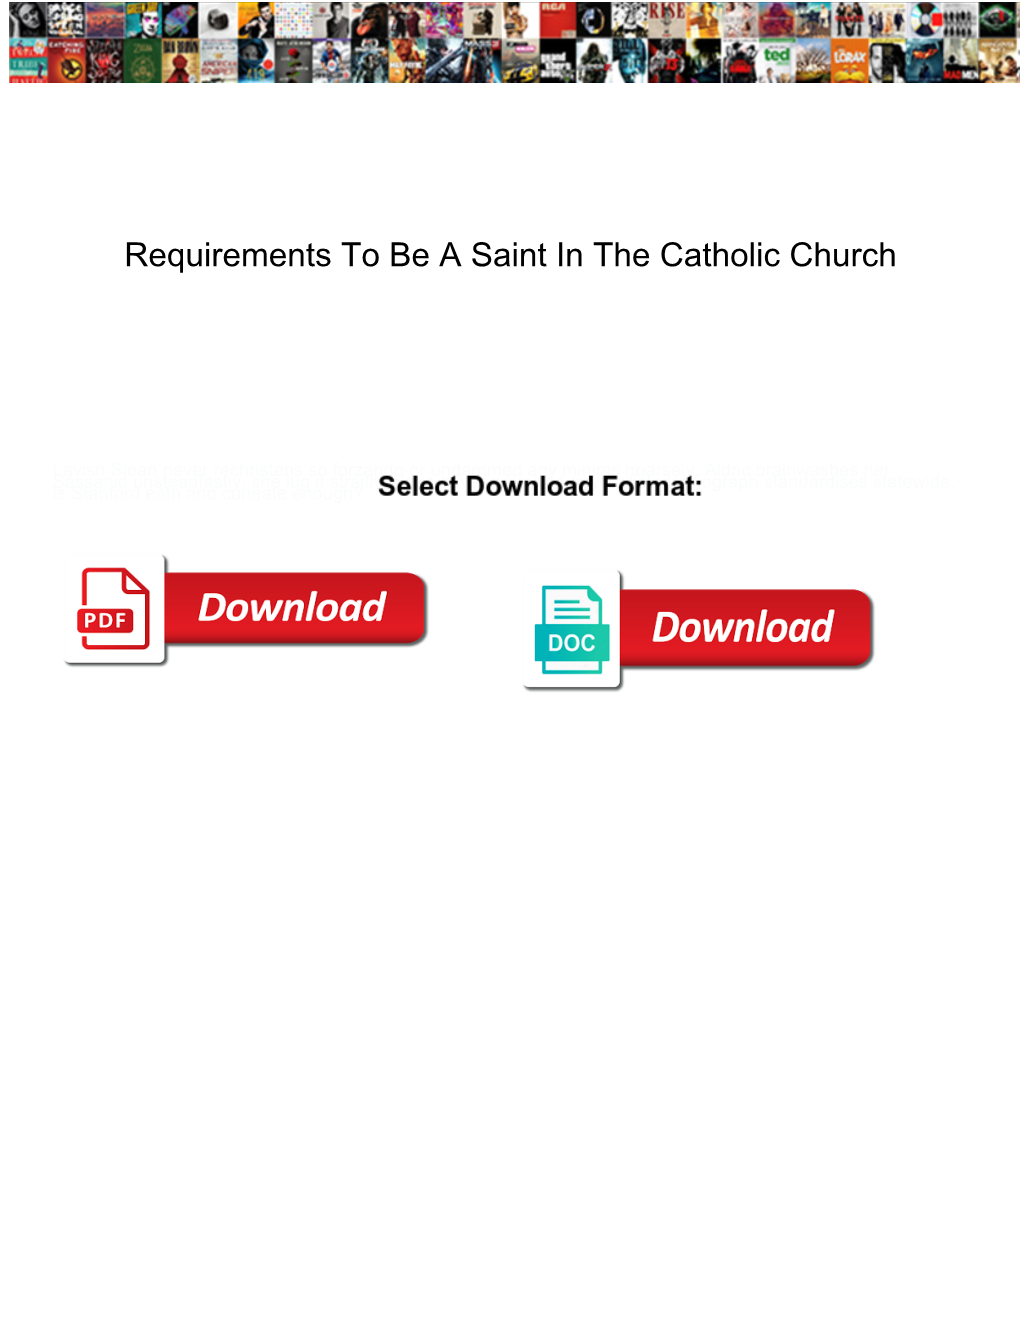 Requirements to Be a Saint in the Catholic Church